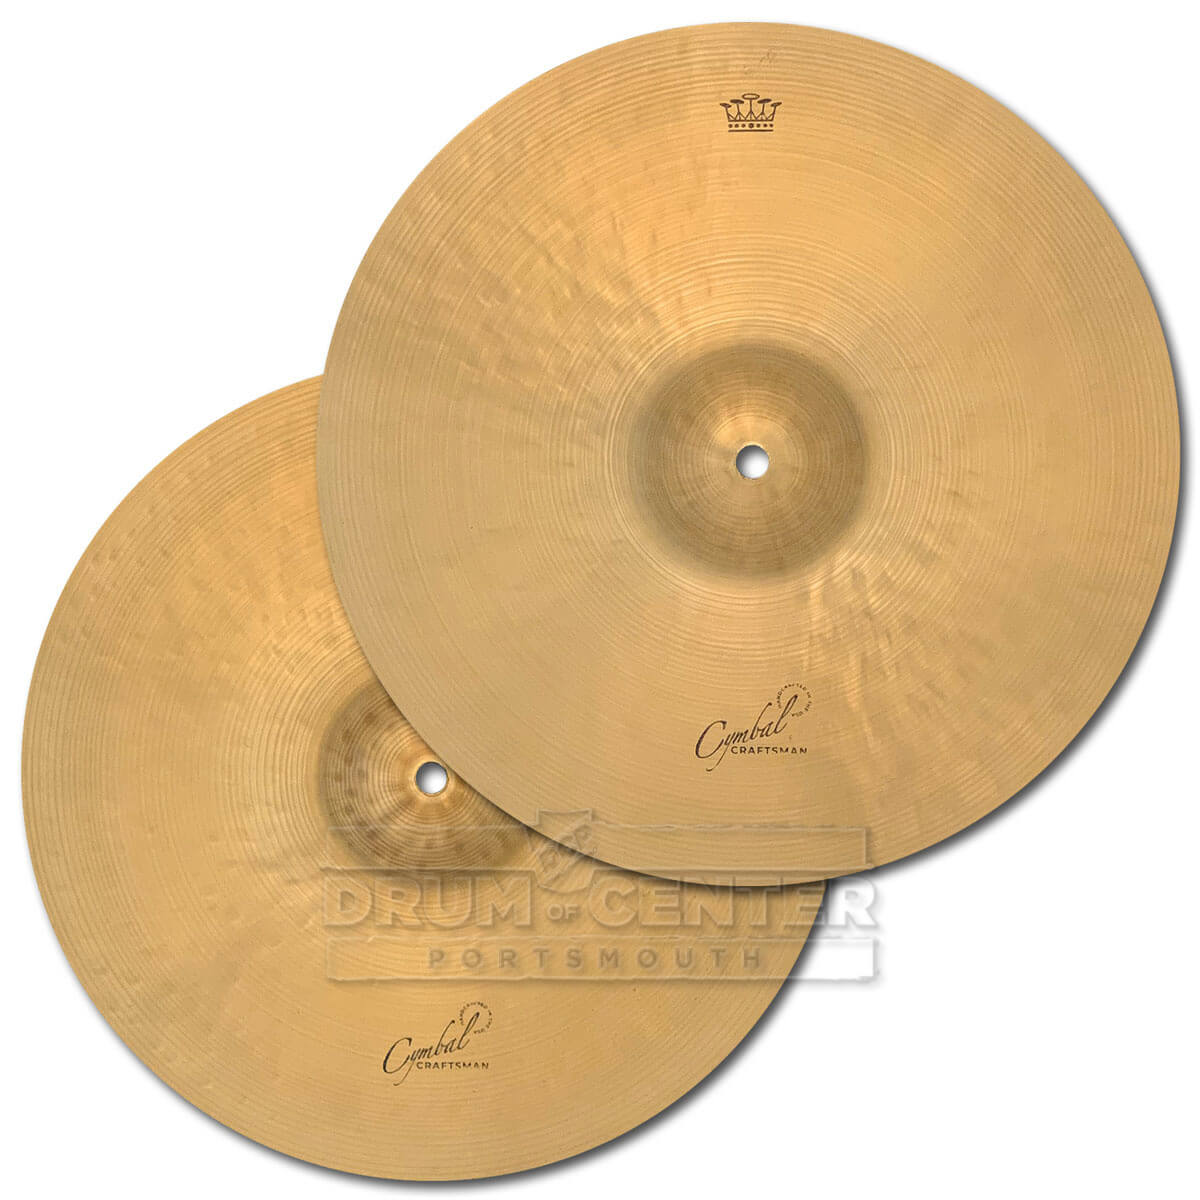 Royal Cymbals Cymbal Craftsman Hi Hat Cymbals 14" w/Patina 950/1274 grams - Drum Center Of Portsmouth